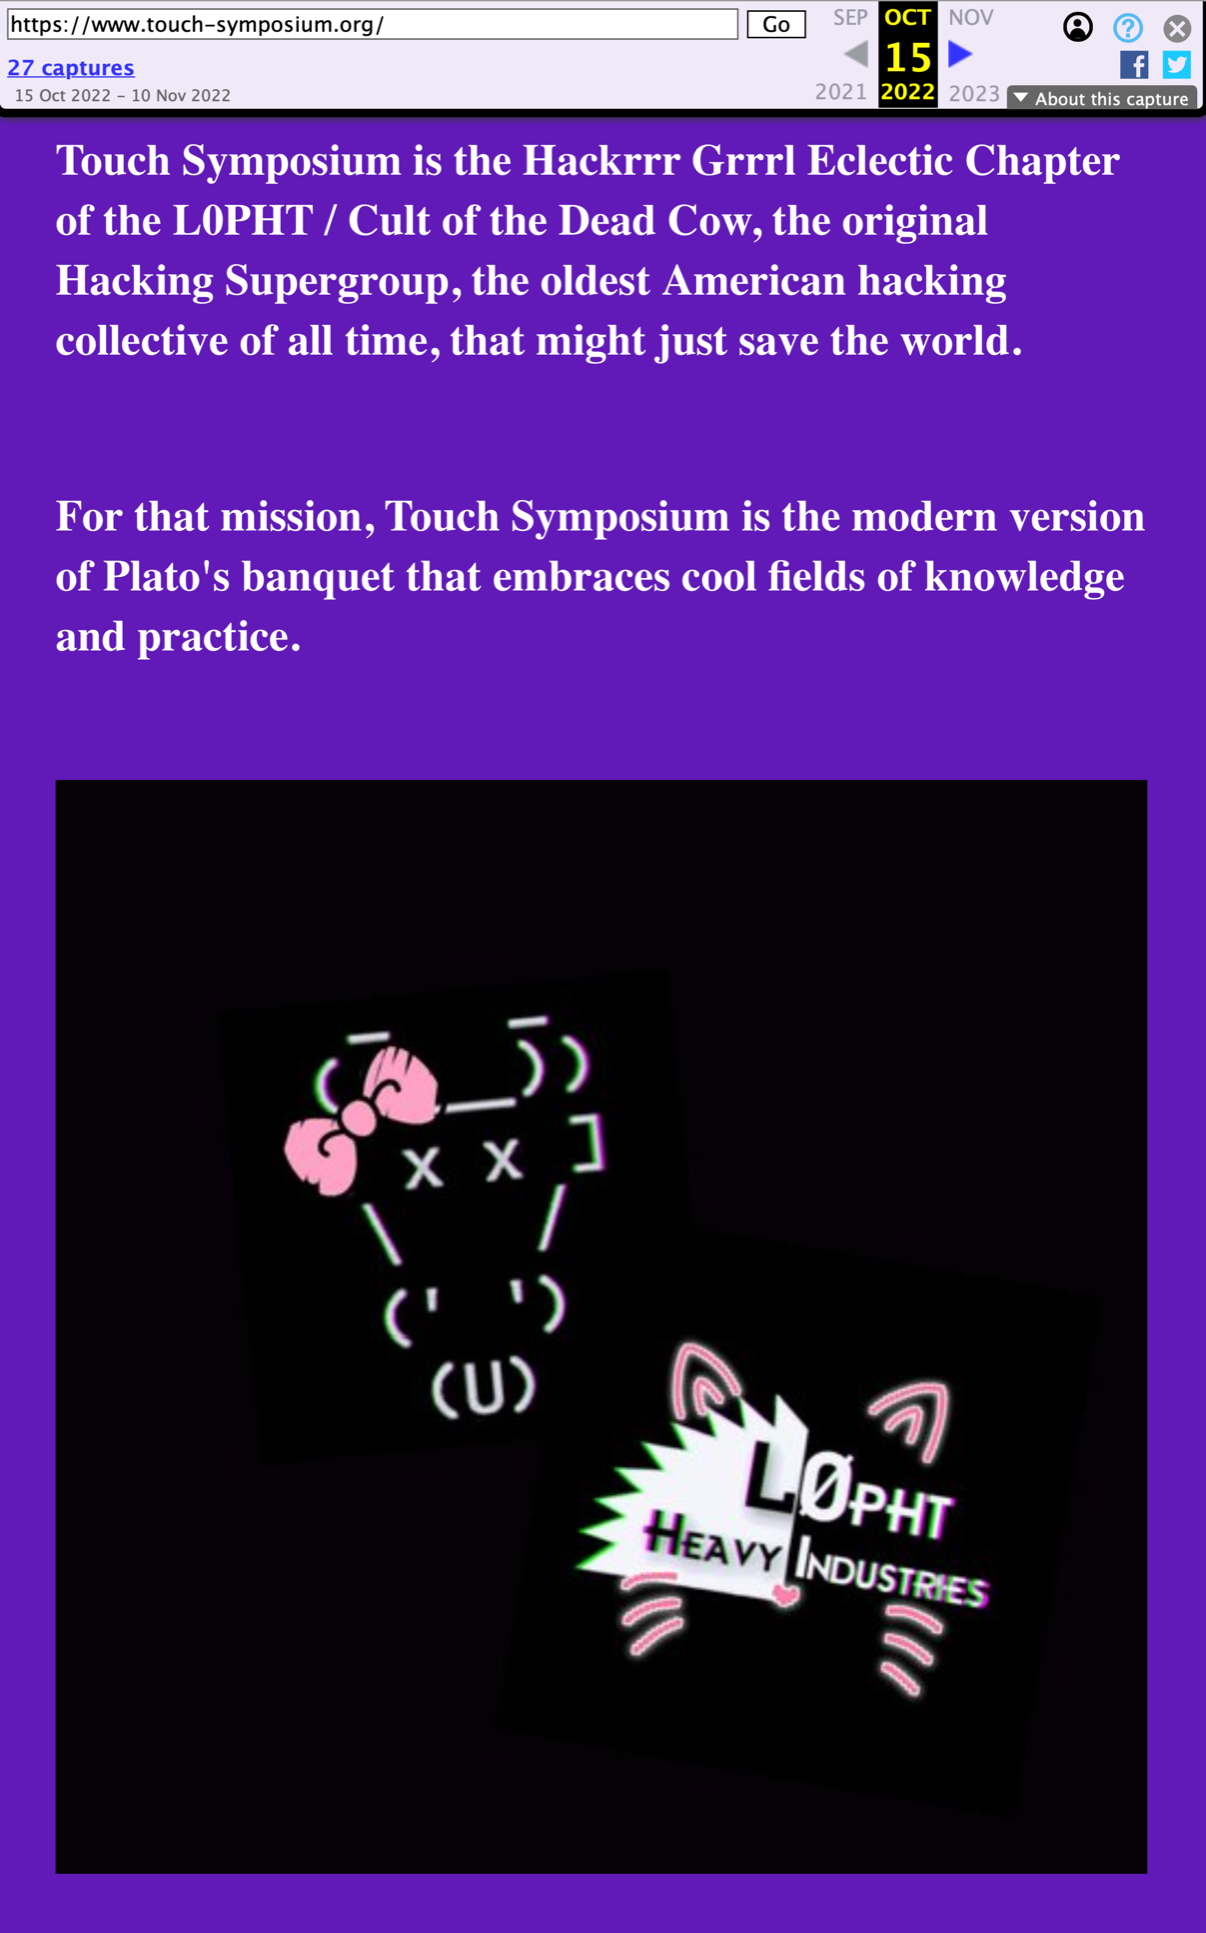 16 Nov 2022 screenshot from the touch-symposium.org website. Inside the circle in the lower right corner is the cDc ASCII cow skull logo adorned with a pink 'Hello Kitty' hair bow, and a L0pht Heavy Industries logo with pink cat ears, whiskers, and nose. In the upper right corner is the text: 'Touch Symposium is the Hackrrr Grrrl Eclectic Chapter of the L0PHT / Cult of the Dead Cow, the original Hacking Supergroup, the oldest American hacking collective of all time, that might just save the world.'